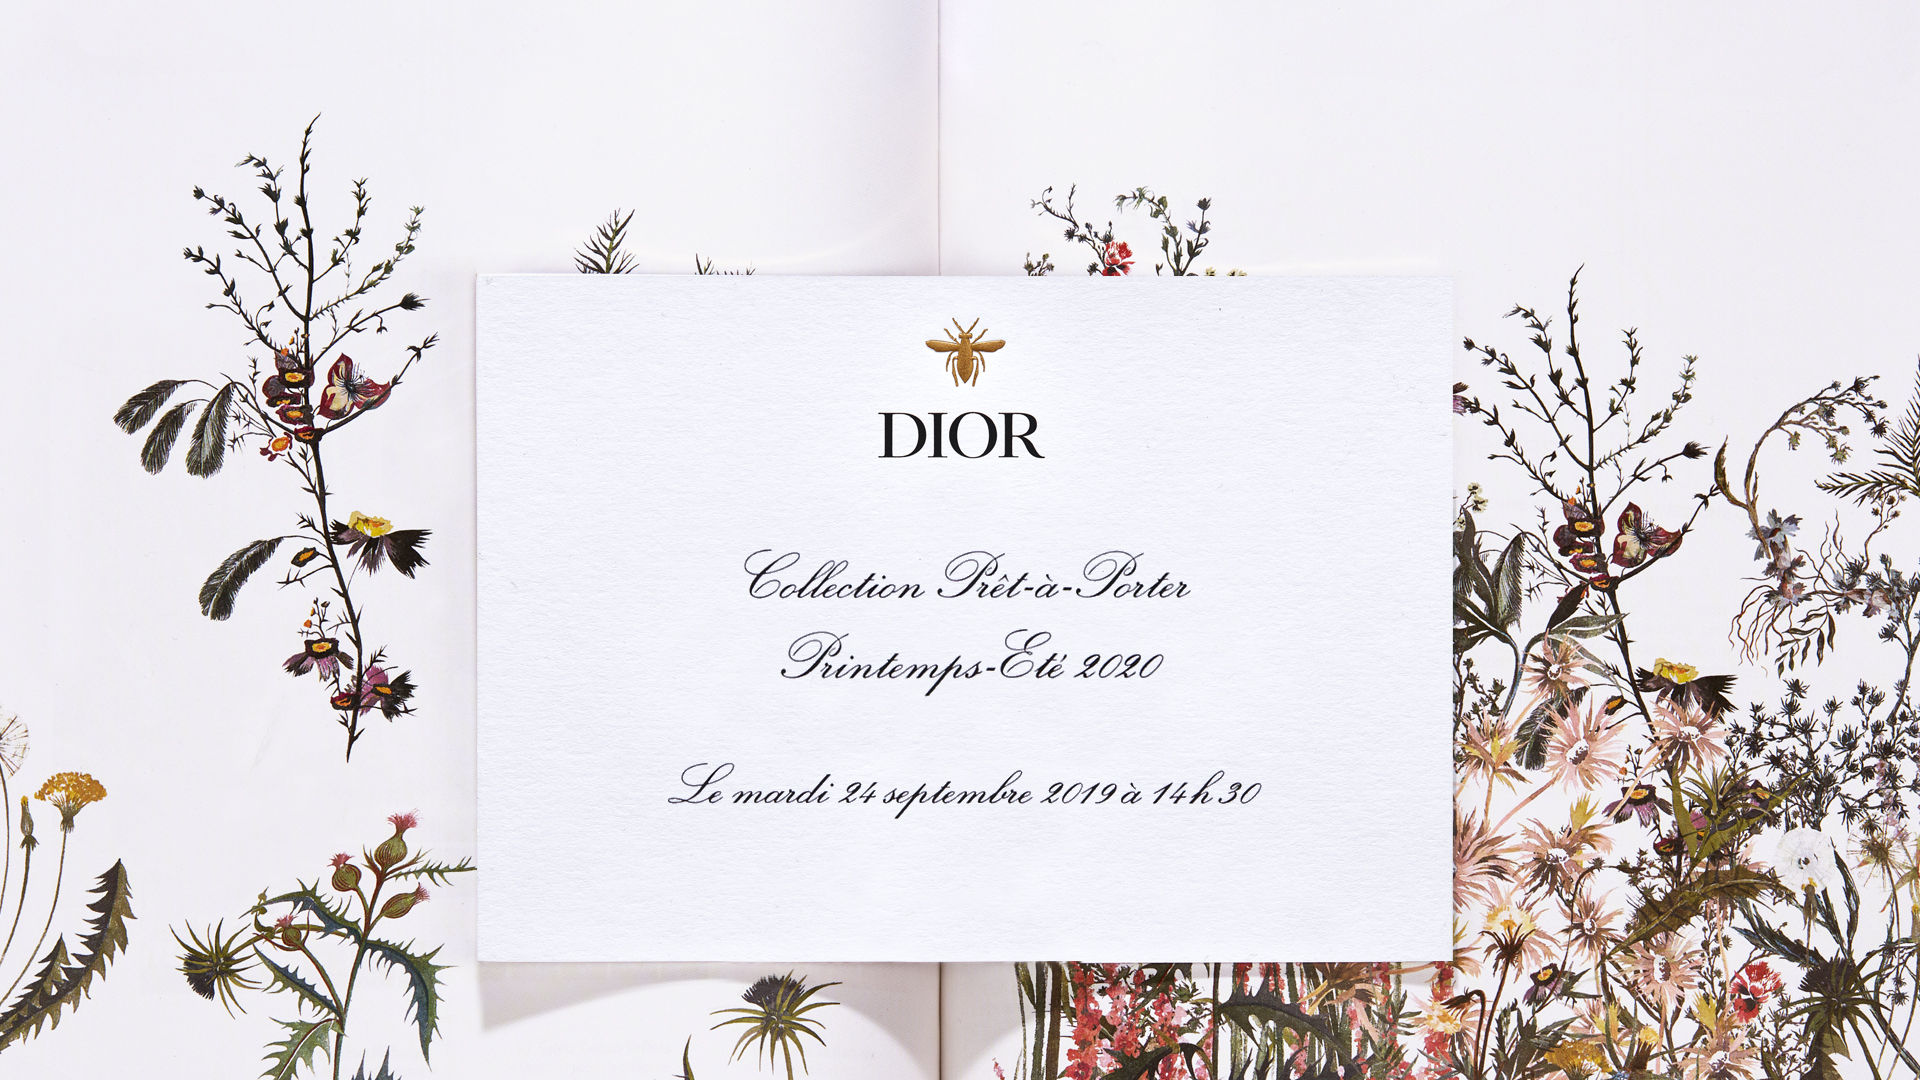 Watch: Dior’s SS20 fashion show, live from Paris